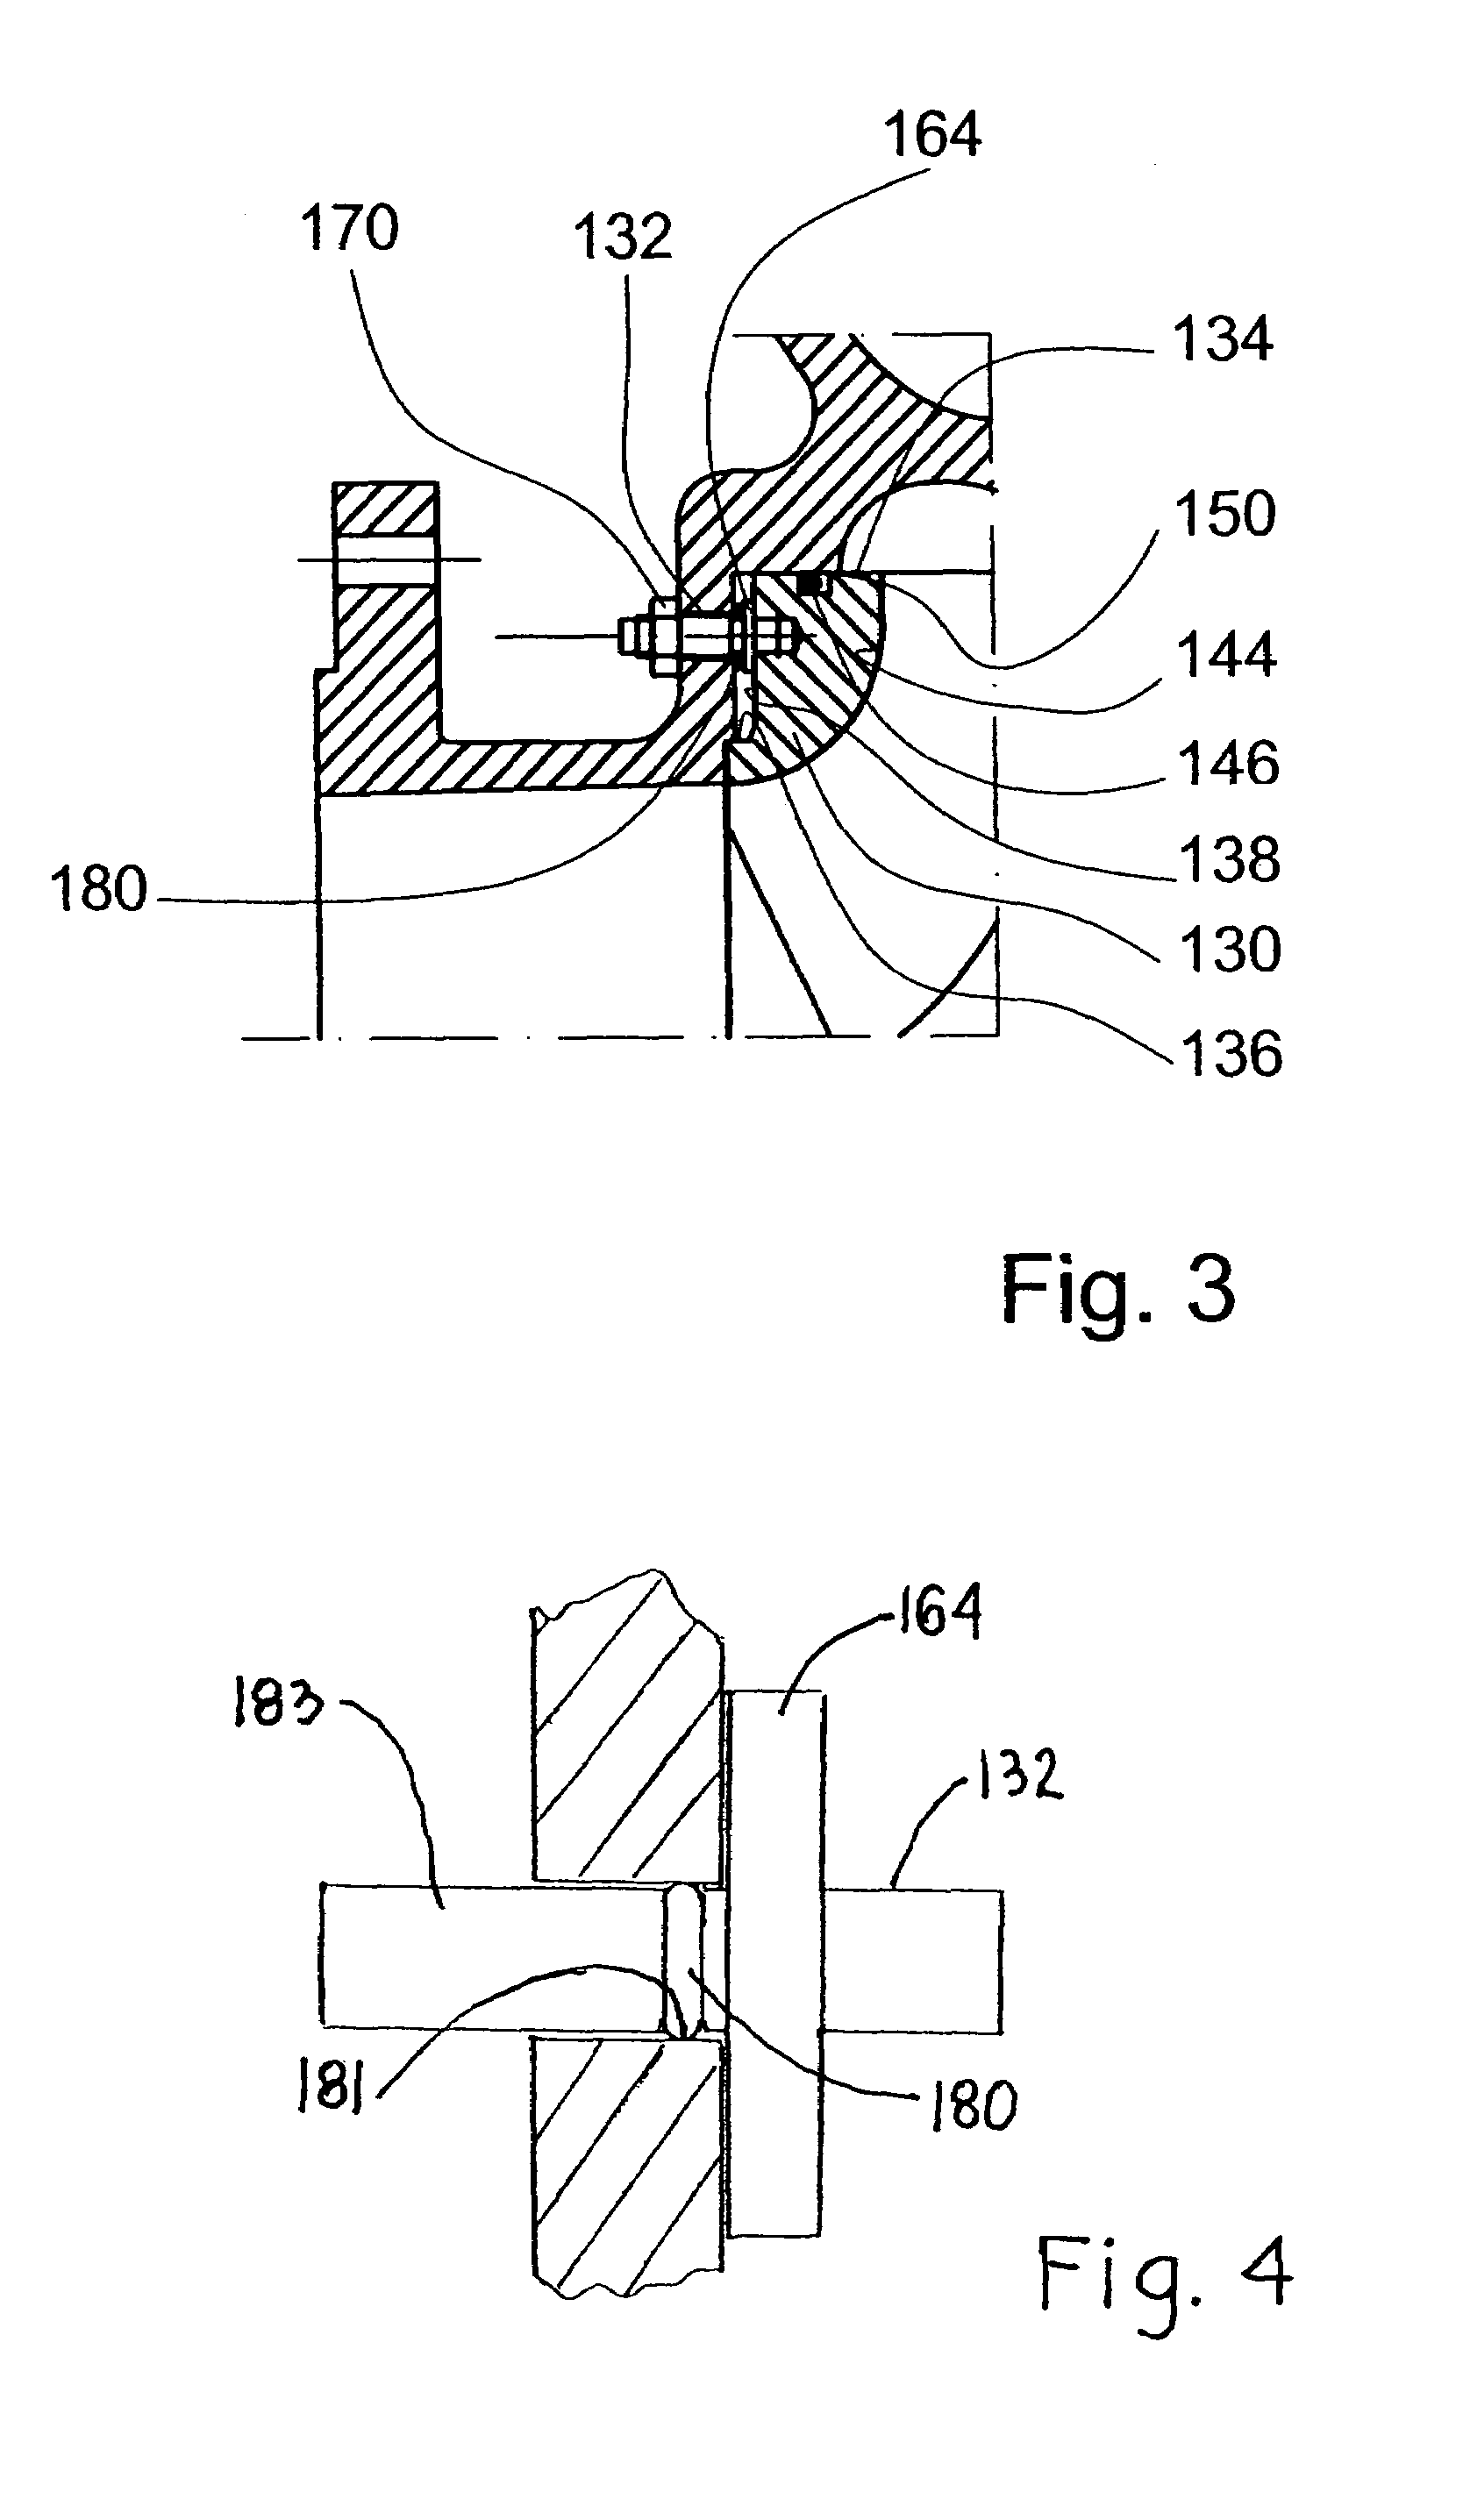 Sealing arrangement for the attachment of a side plate of a centrifugal pump and an attachment screw used therewith